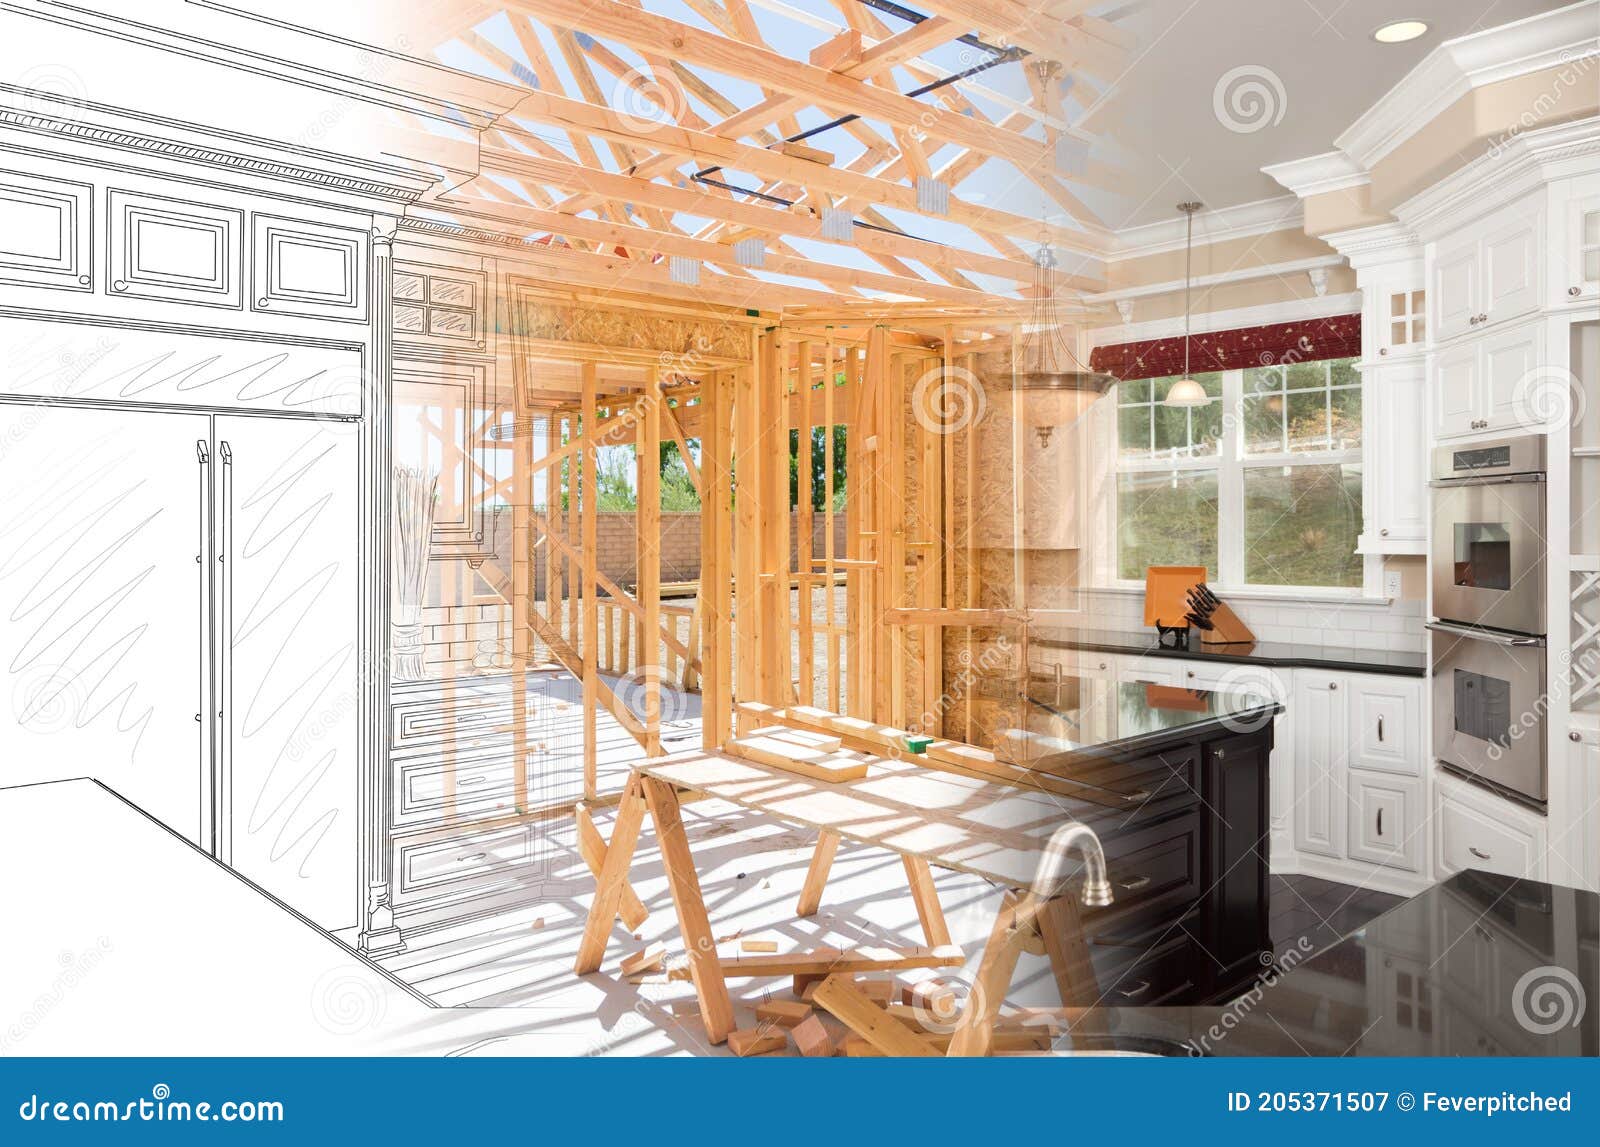 kitchen blueprint drawing gradating into house construction framing then into finished build